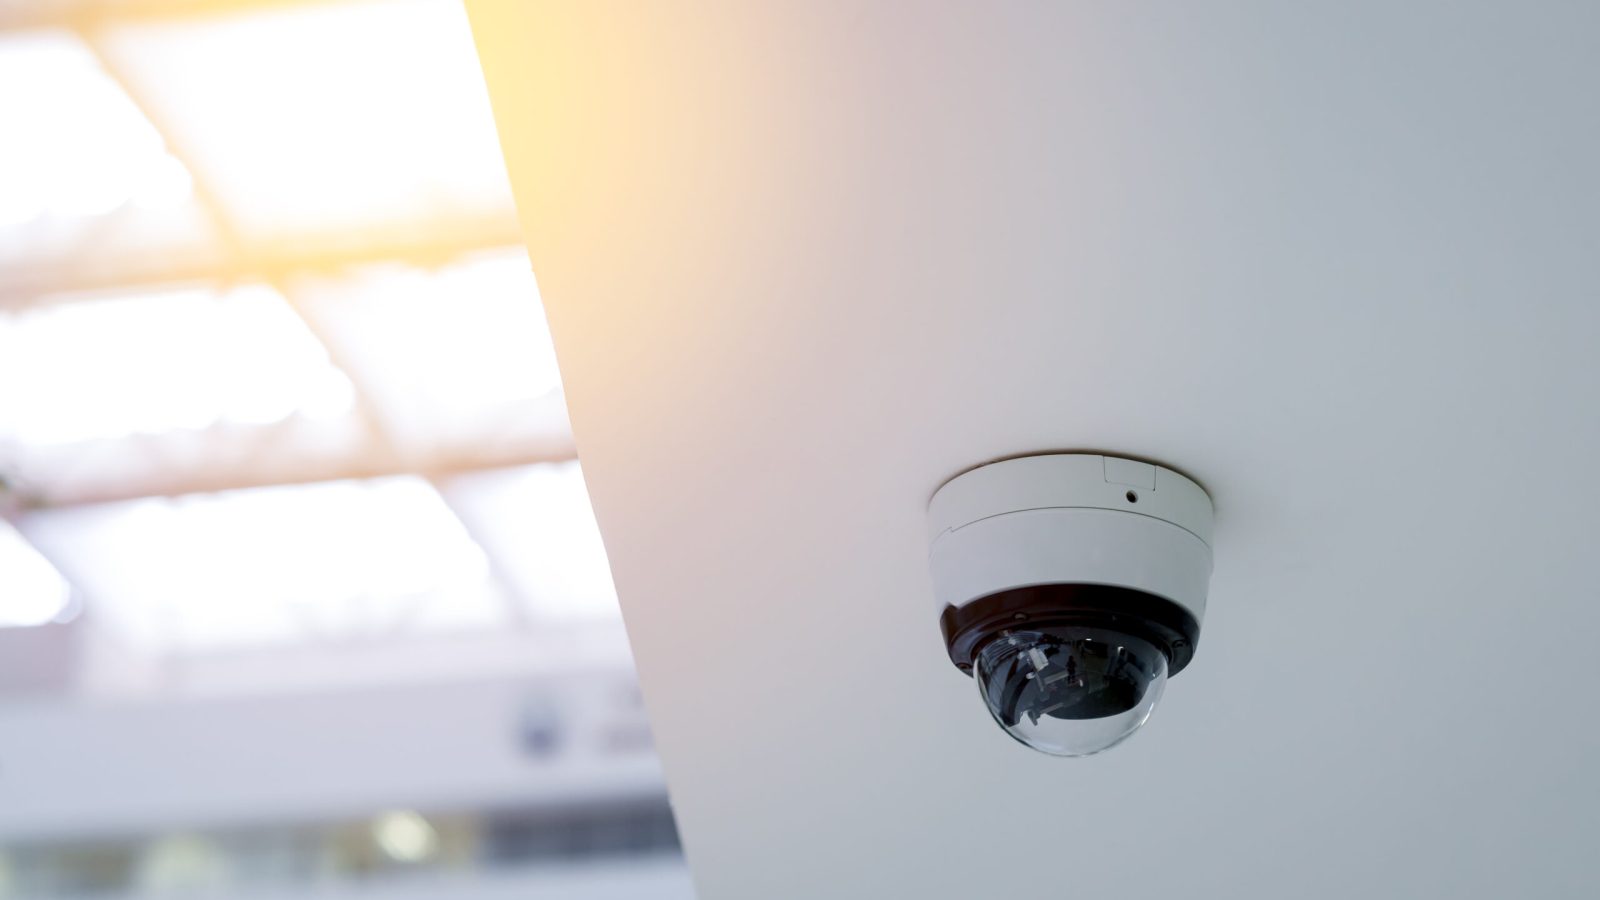 Enhance security with our state-of-the-art office security cameras, providing vigilant surveillance in Des Moines, Ankeny, and all of Iowa.